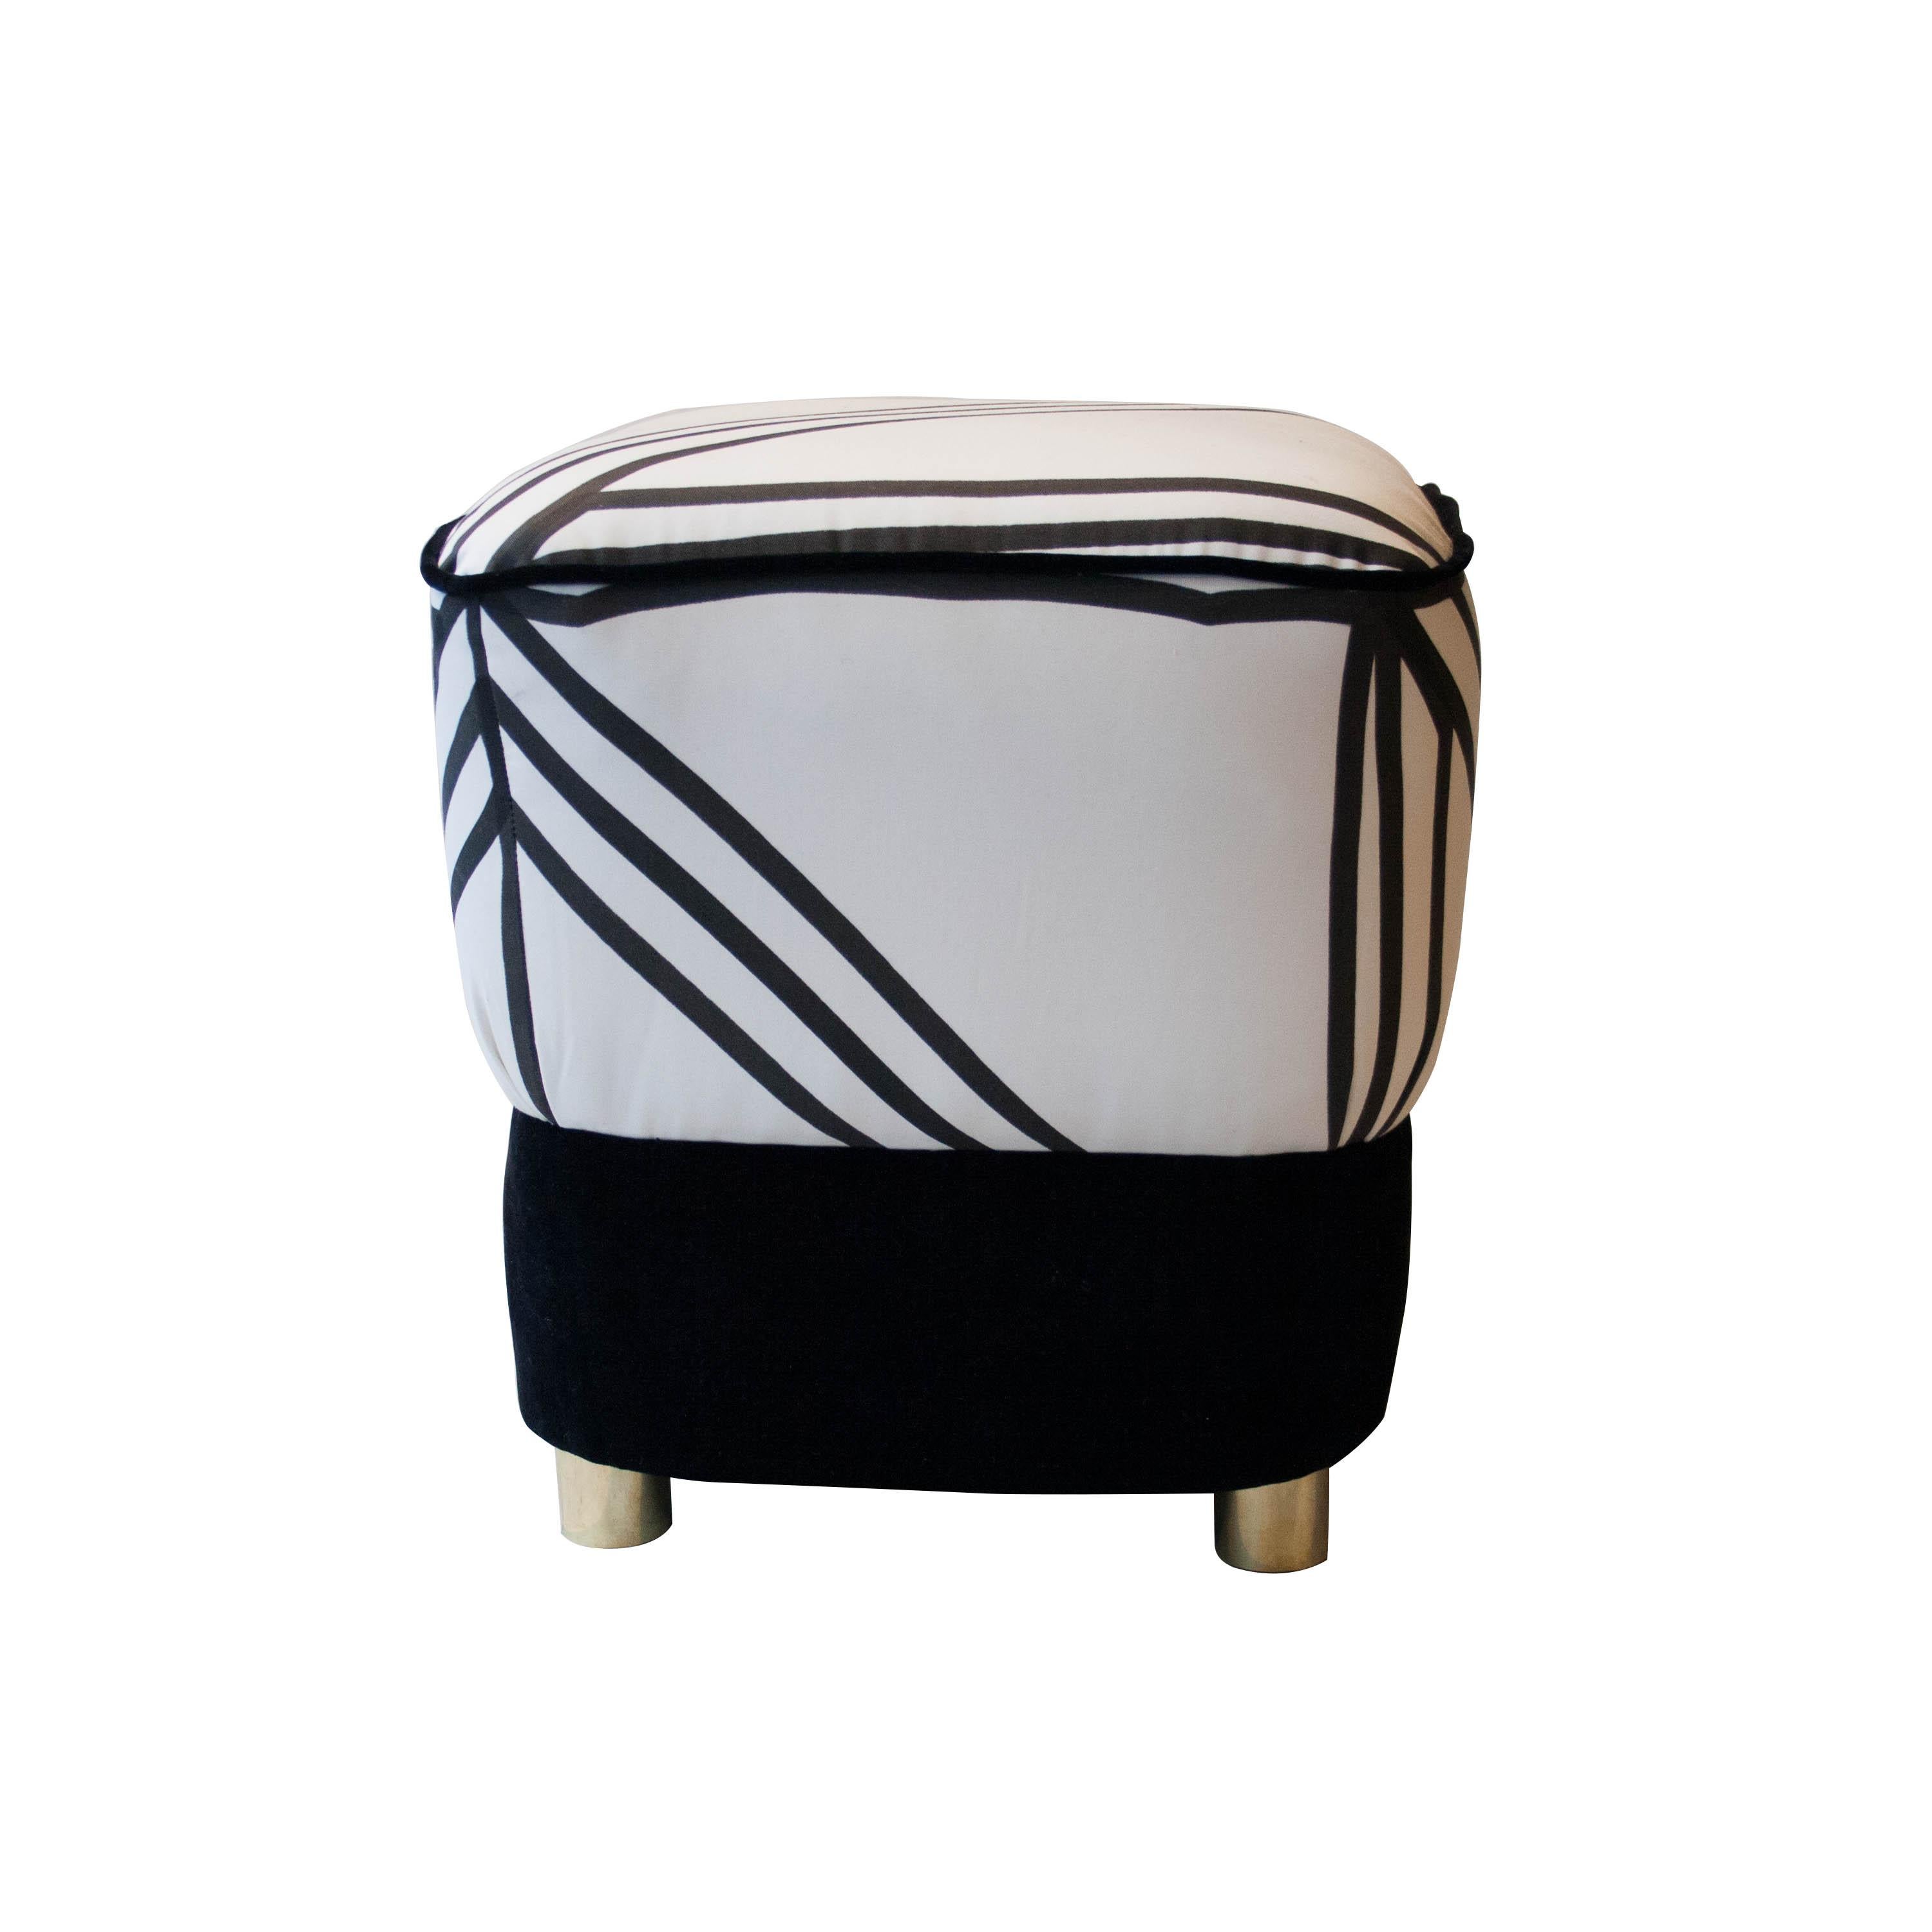 Square, made of solid wood structure pouf white linen upholstery in two colors ''Tessuto Tria'' hand painted by Livio de Simone. Finished in brass legs.
 
  